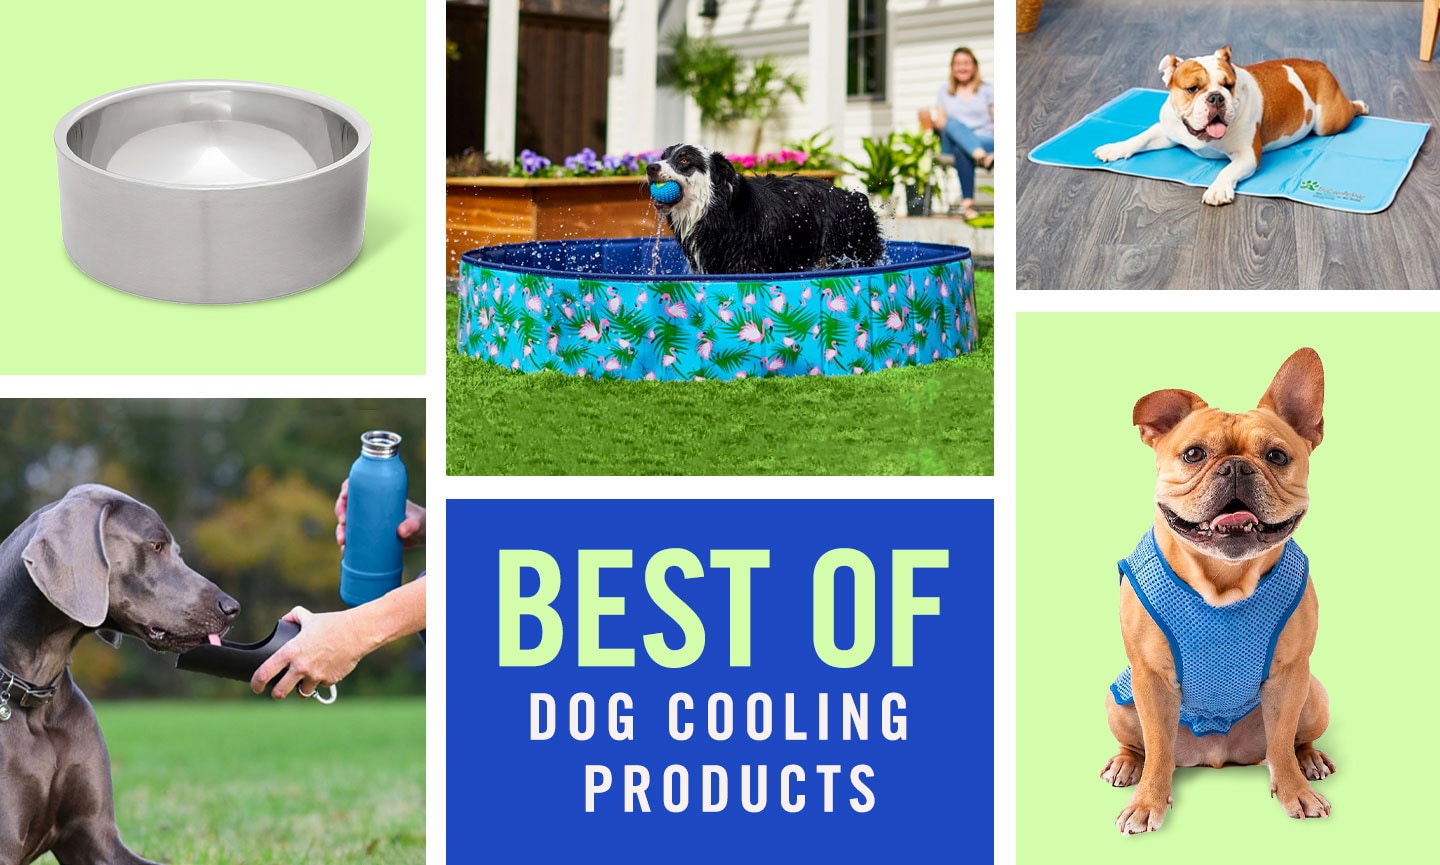 https://media-be.chewy.com/wp-content/uploads/2023/05/24150832/best-dog-cooling-products-to-keep-dogs-cool.jpg